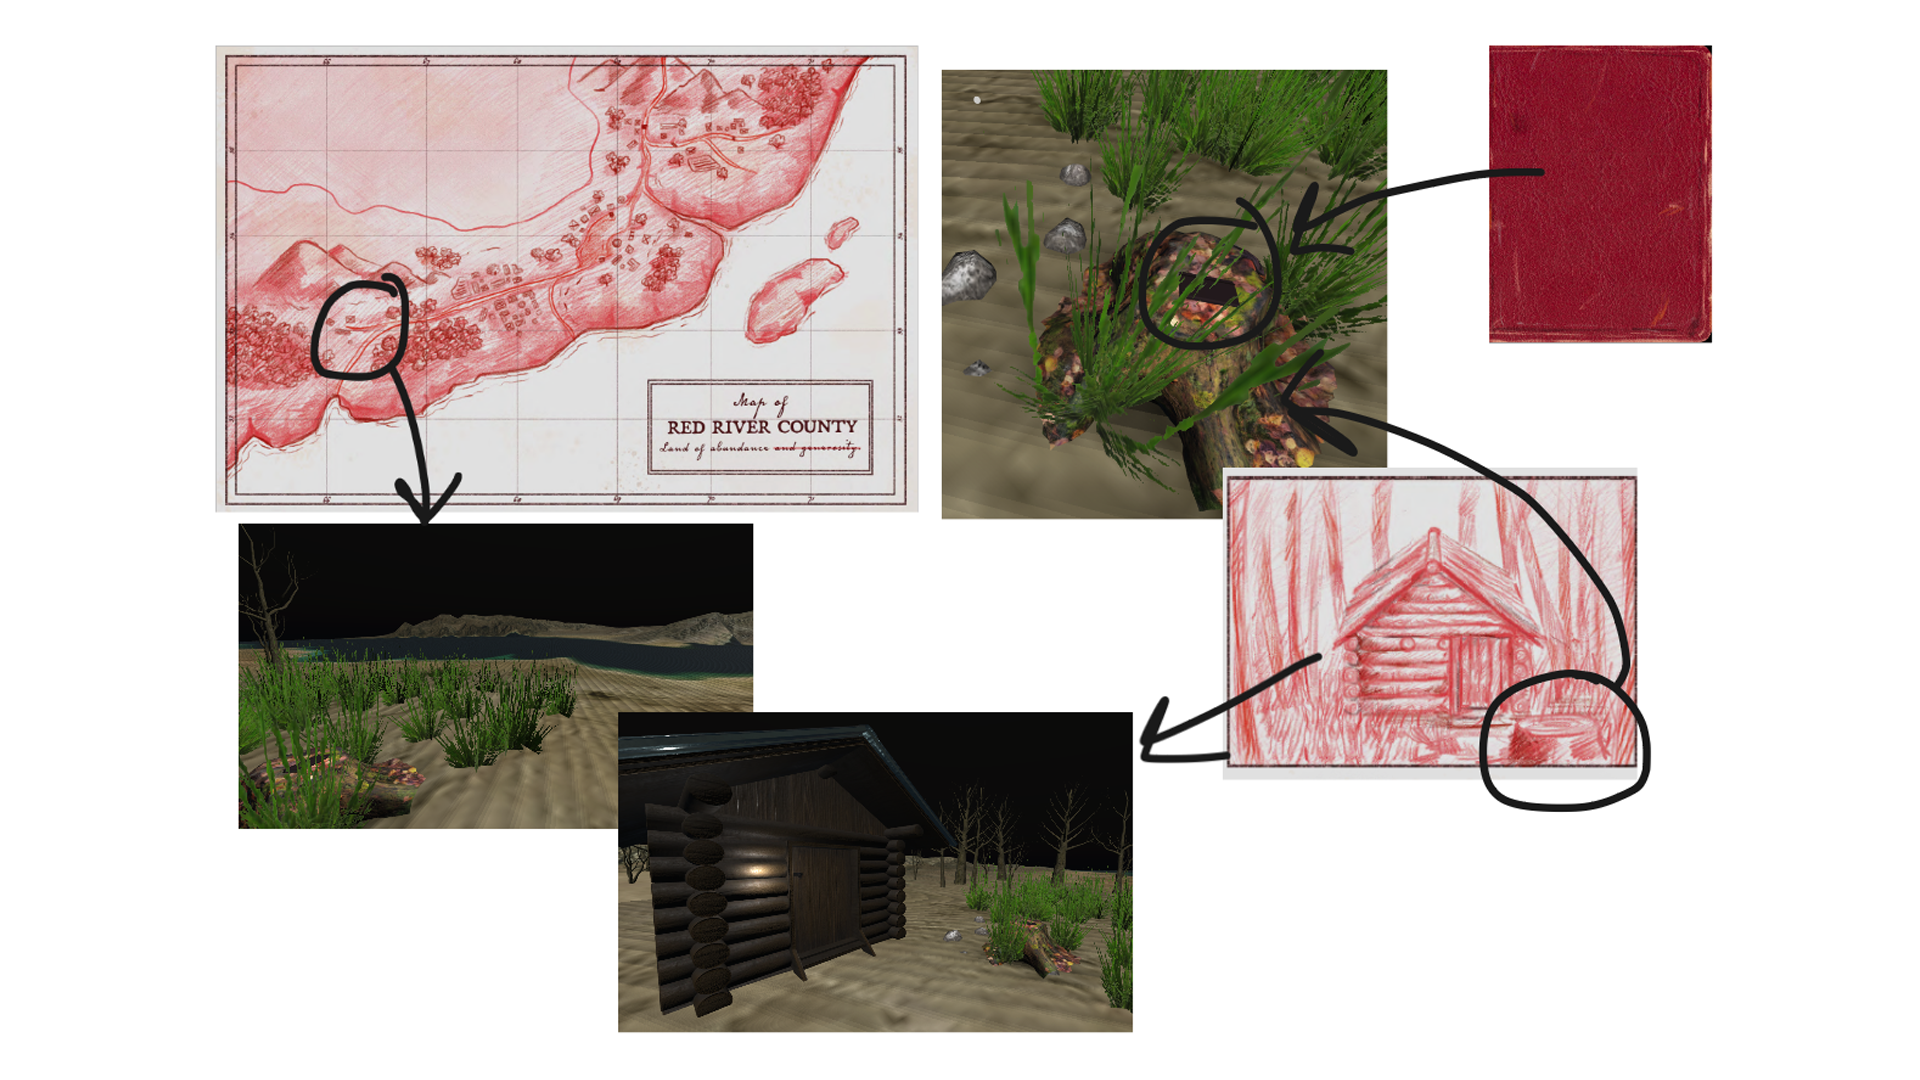 Screenshots showing concept art of Red River County compared to its virtual counterpart.